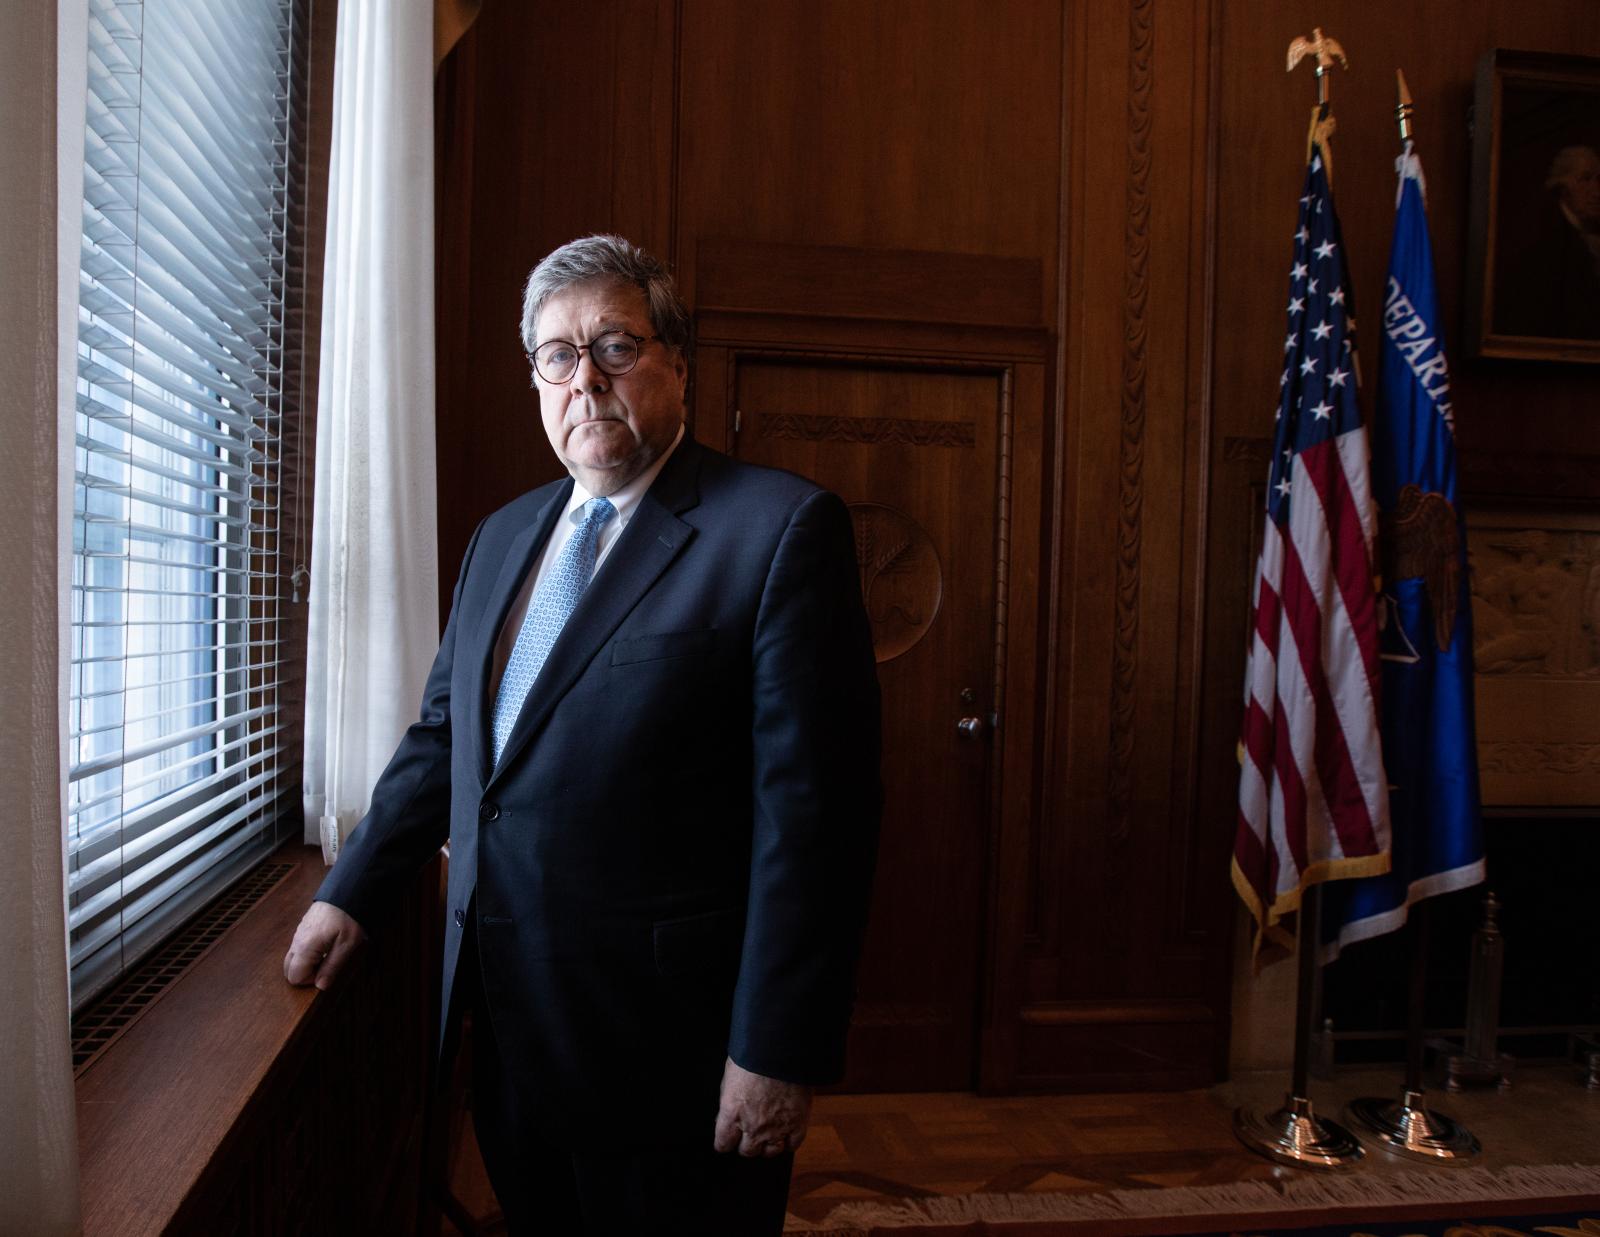 Washington D.C. June 25th 2020. William Pelham Barr, American attorney General and government official posing for a portrait at a conference room at the Department of Justice in Washington D.C. 